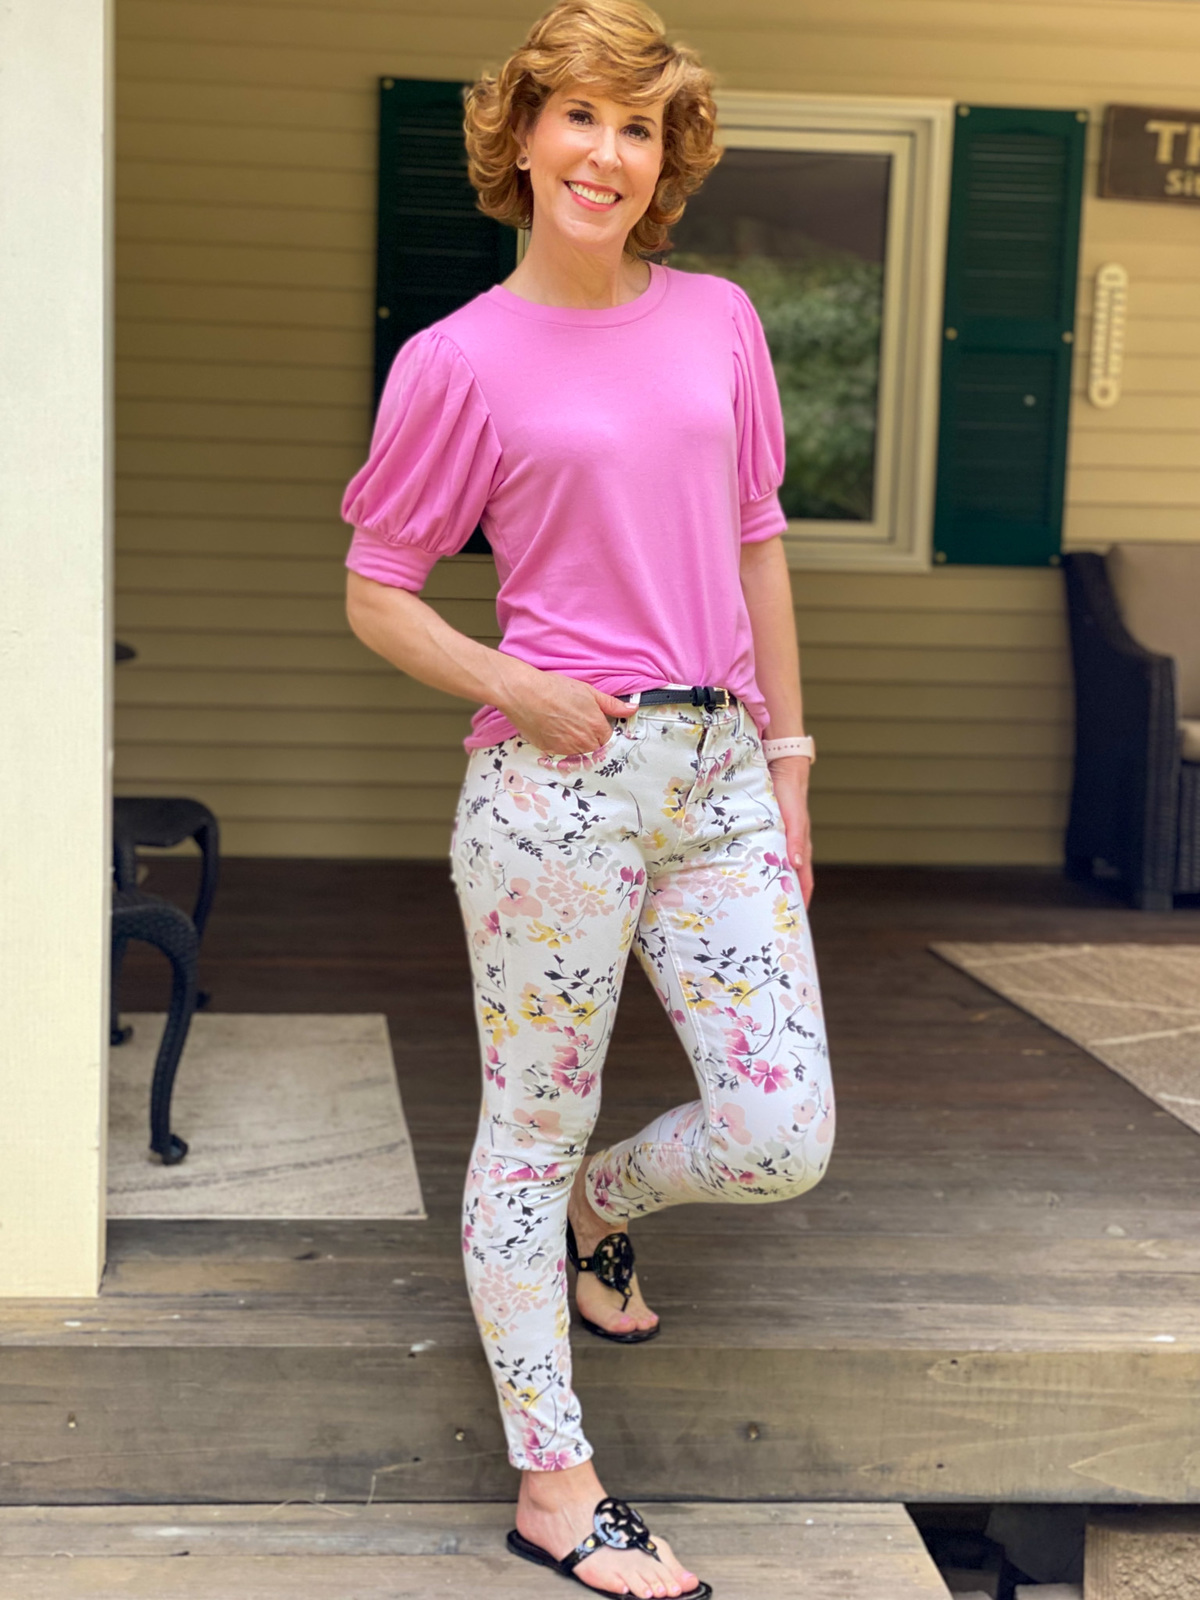 woman wearing pink puffy sleeve tee and floral pants standing on a porch step